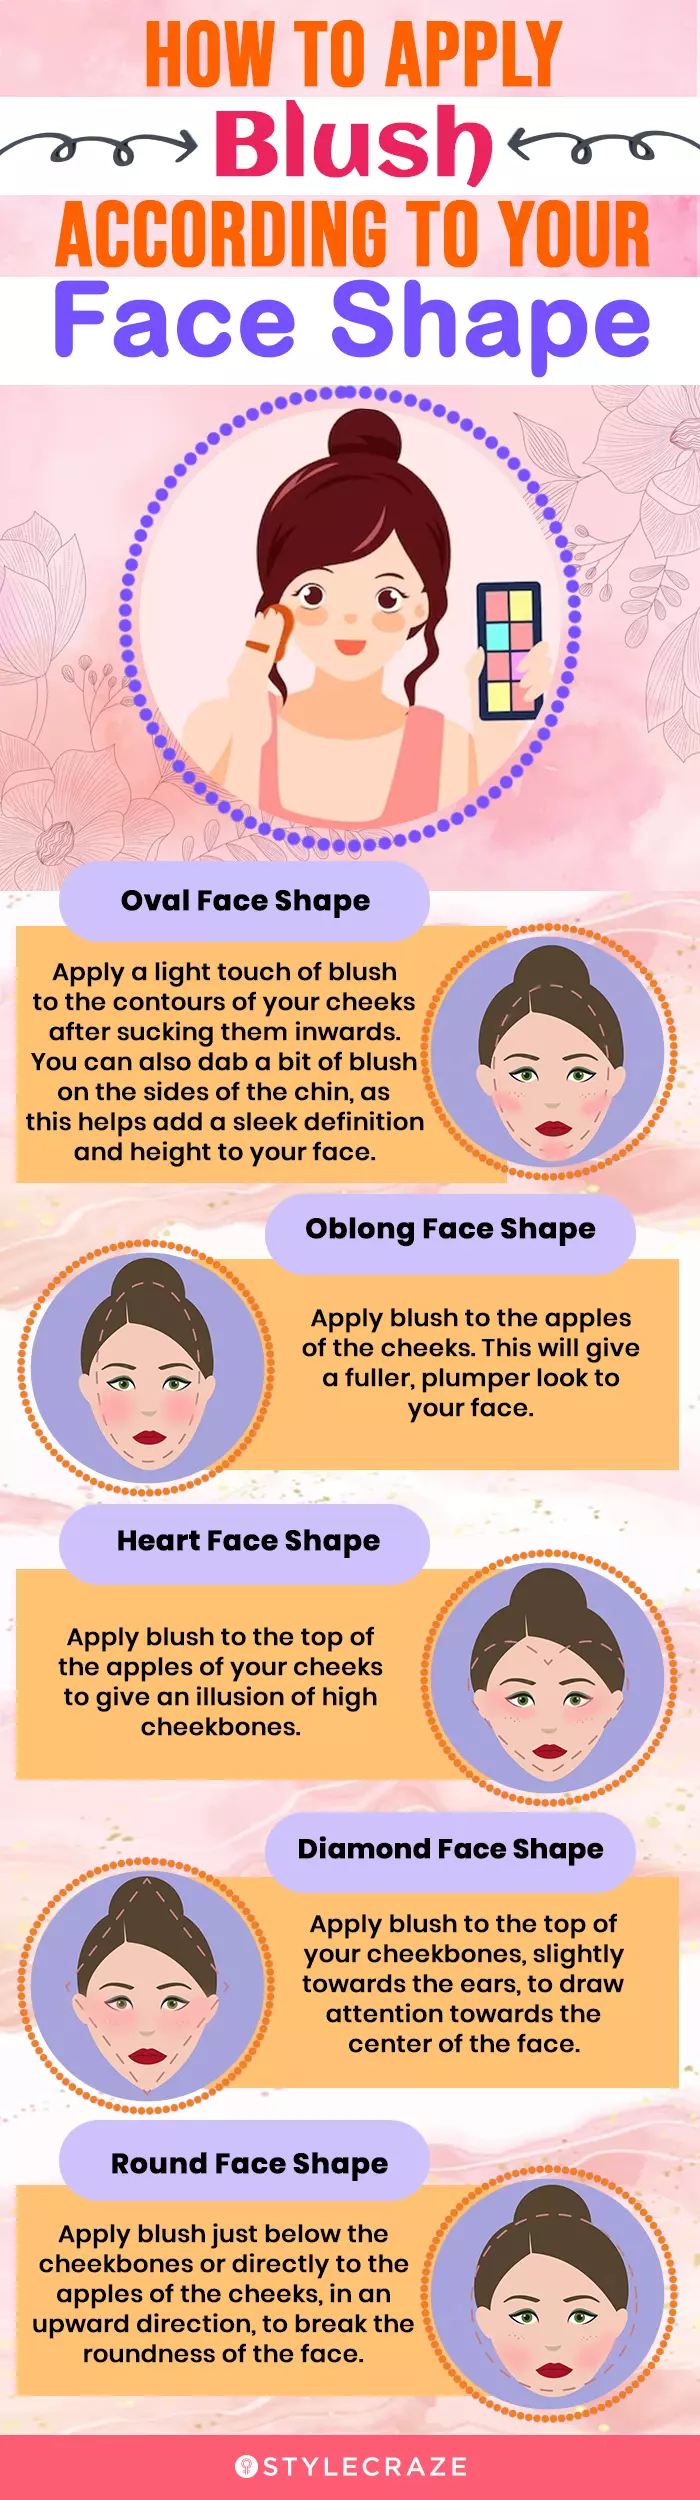 how to apply blush according to your face shape (infographic)